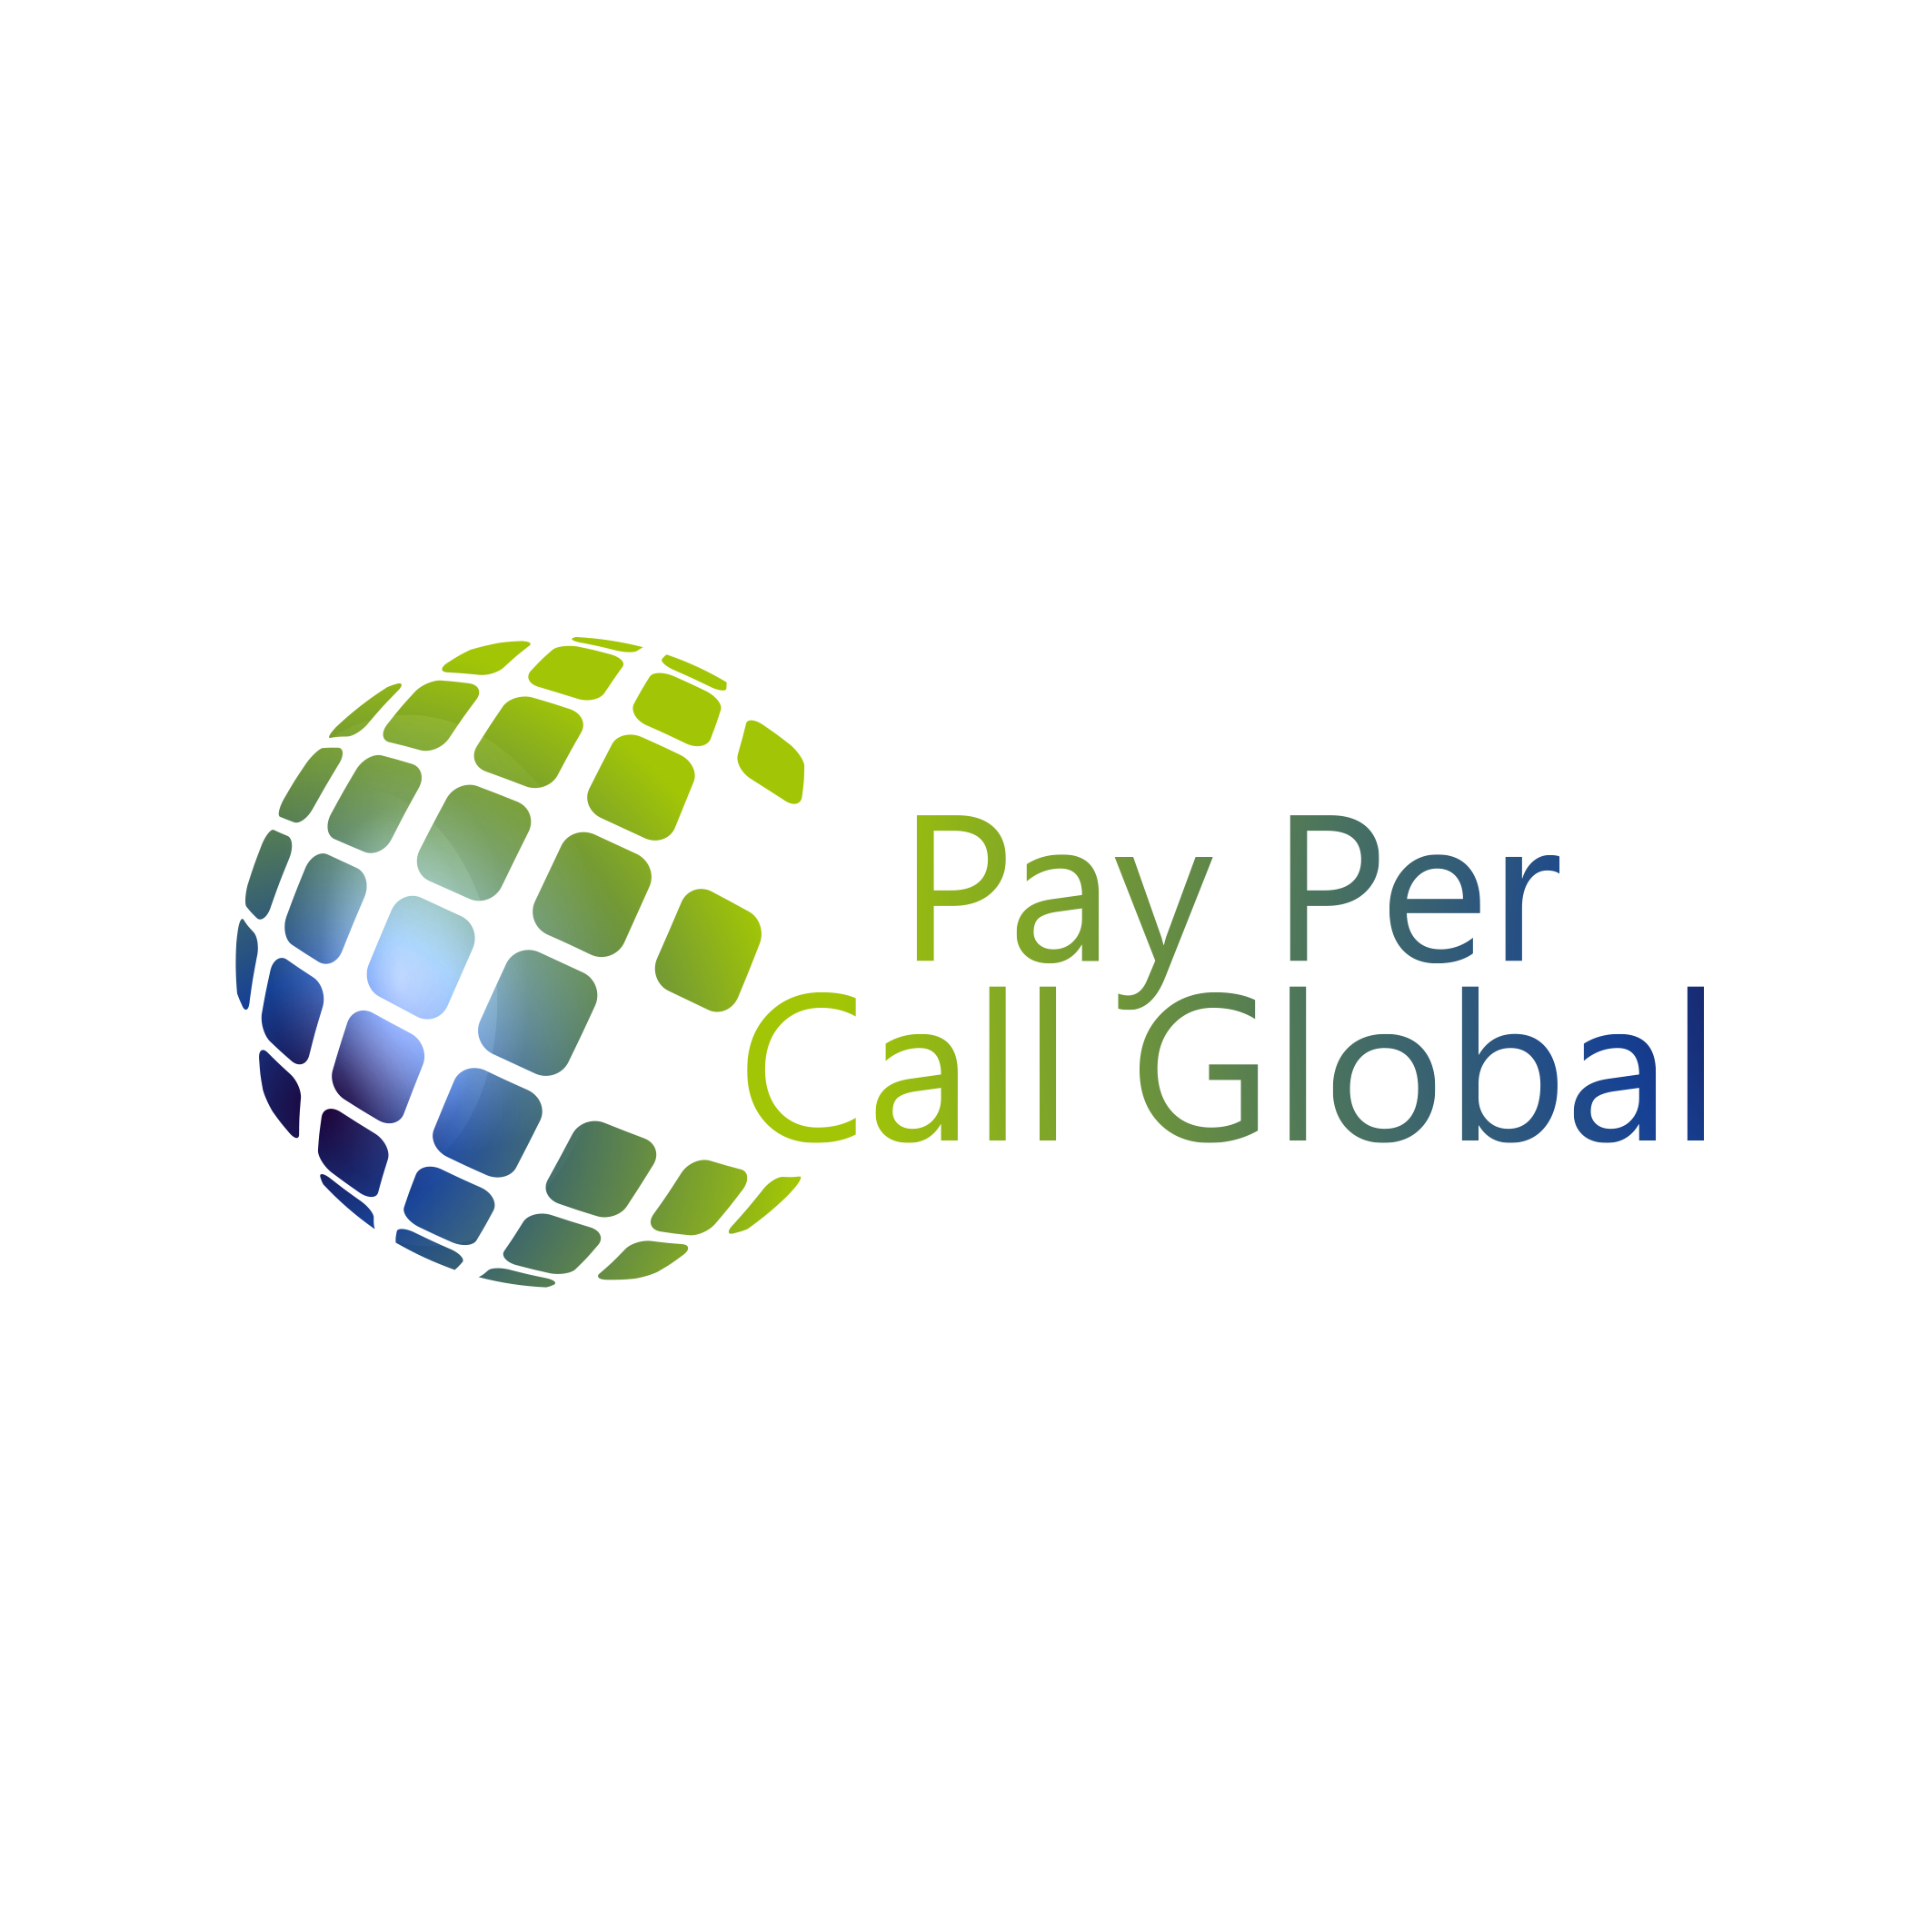 Pay per call networks